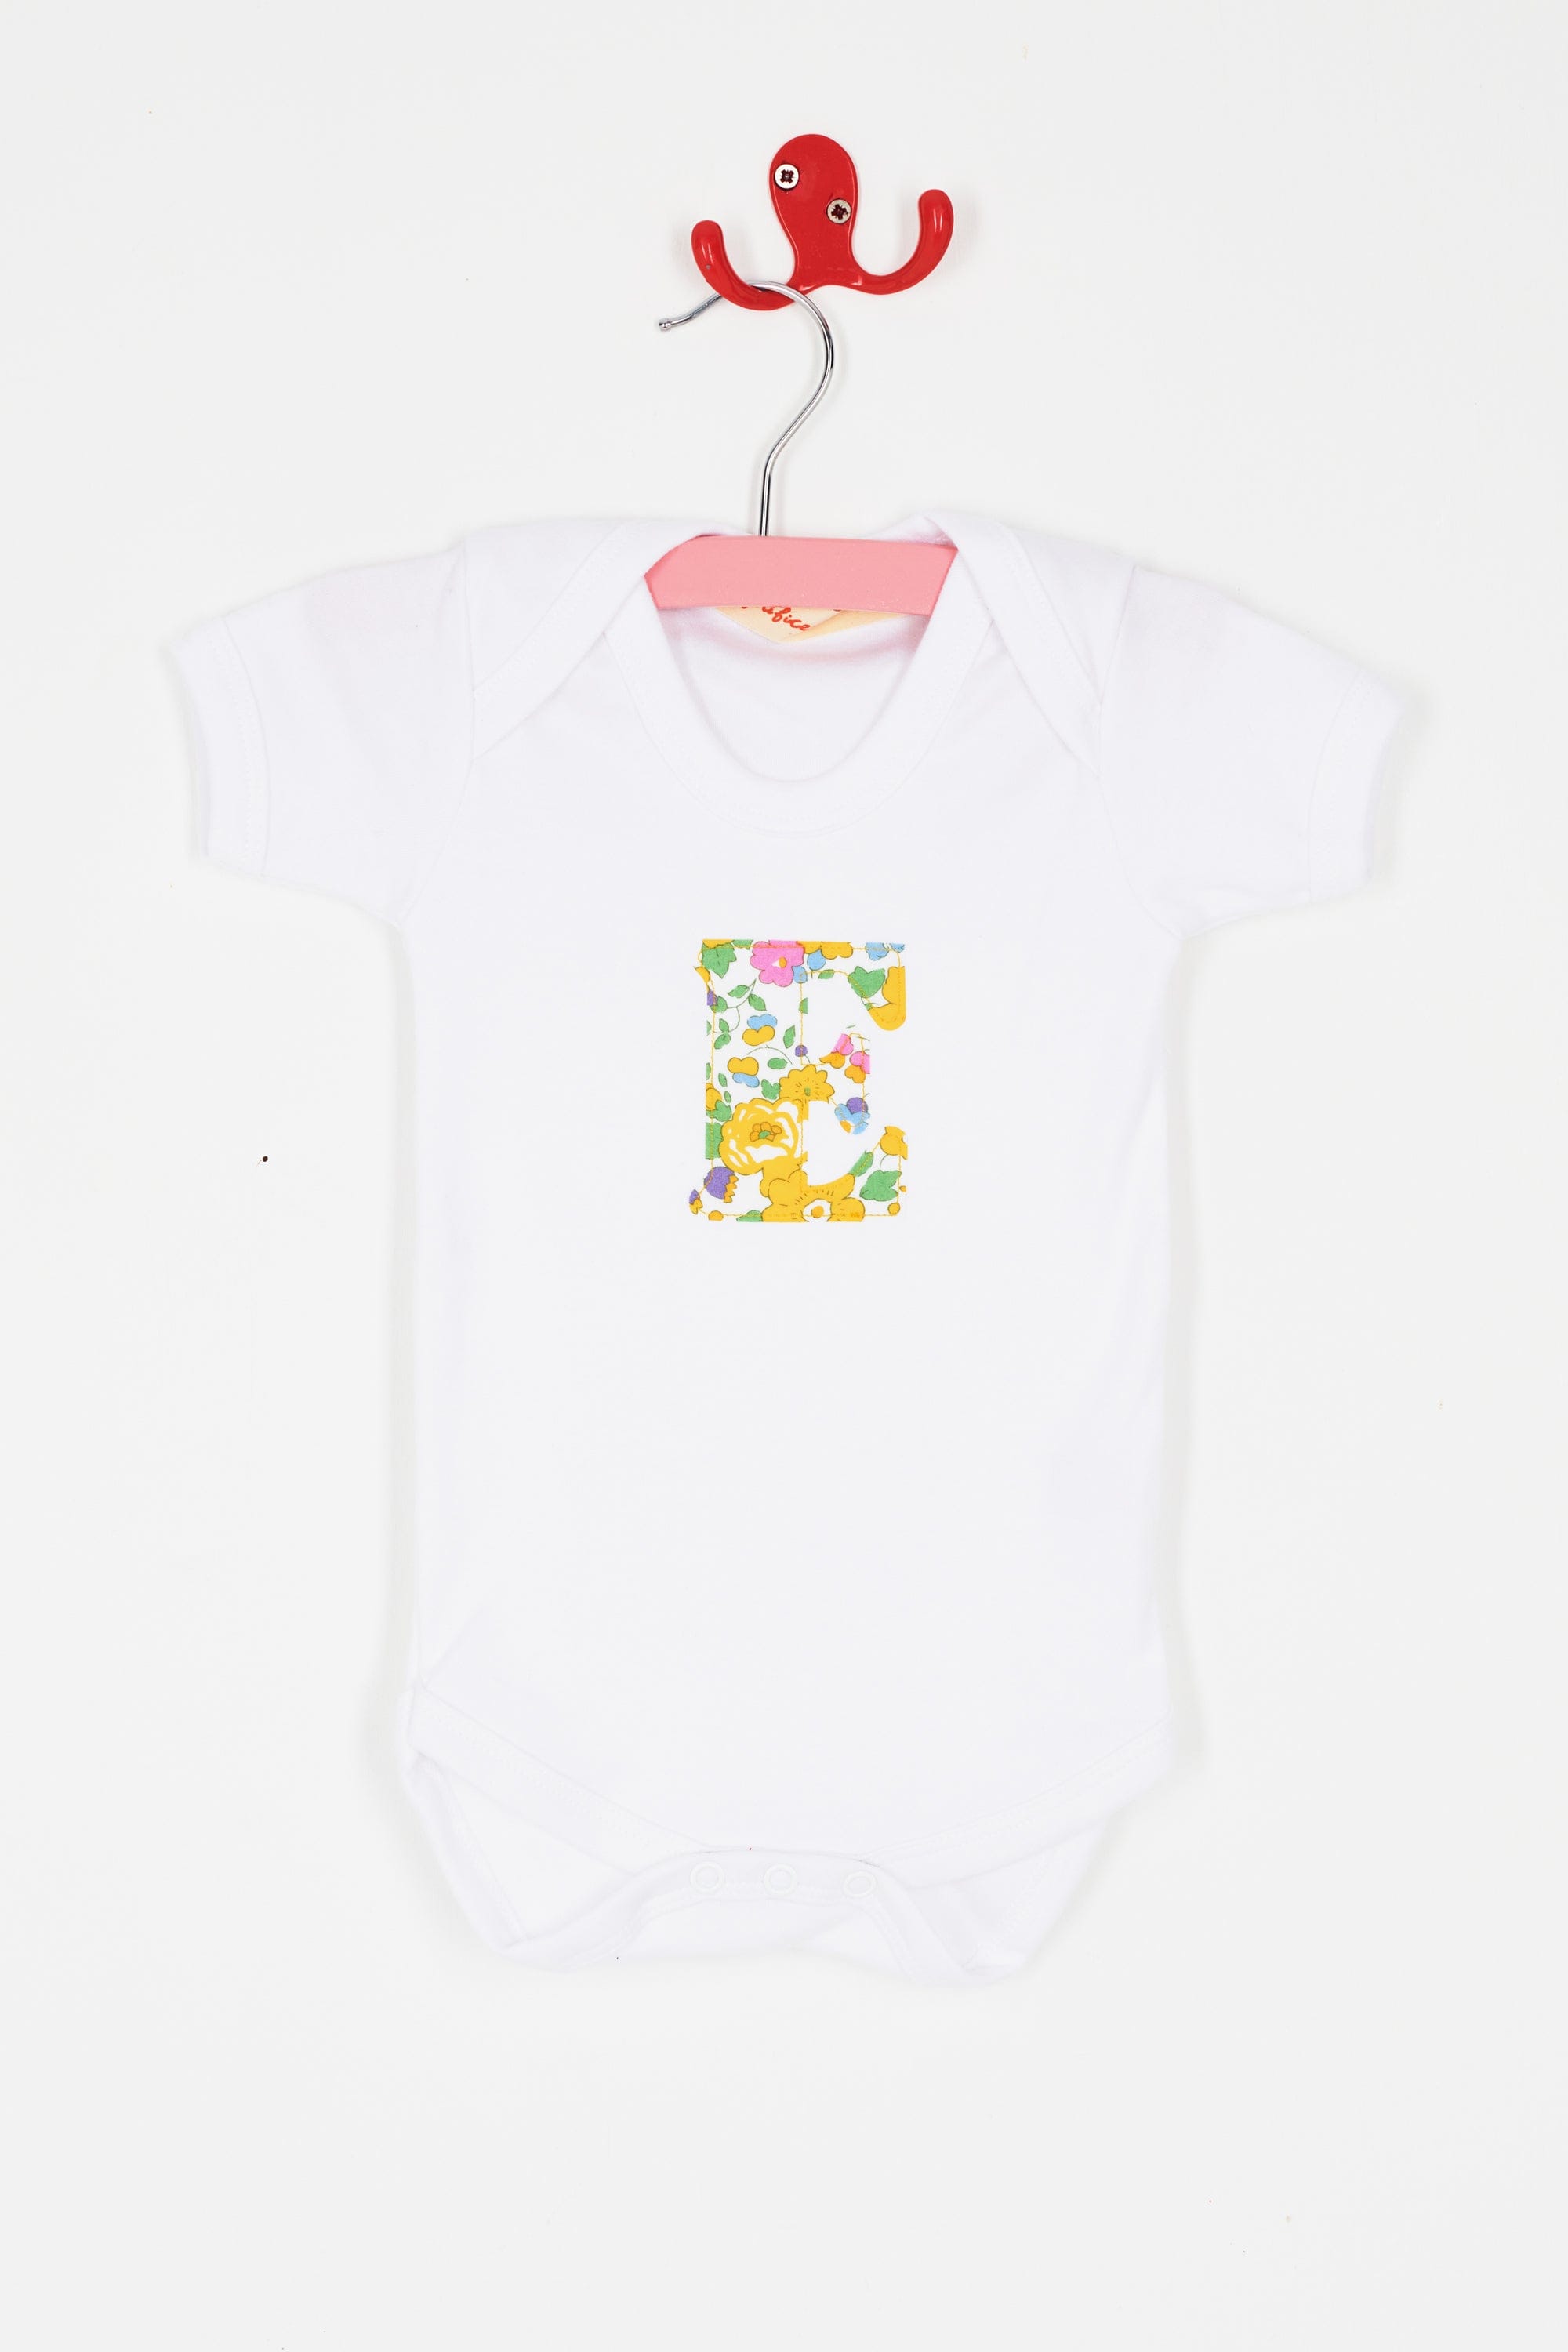 Magnificent Stanley Bodysuit Personalised Bodysuit in Betsy Yellow Liberty Print